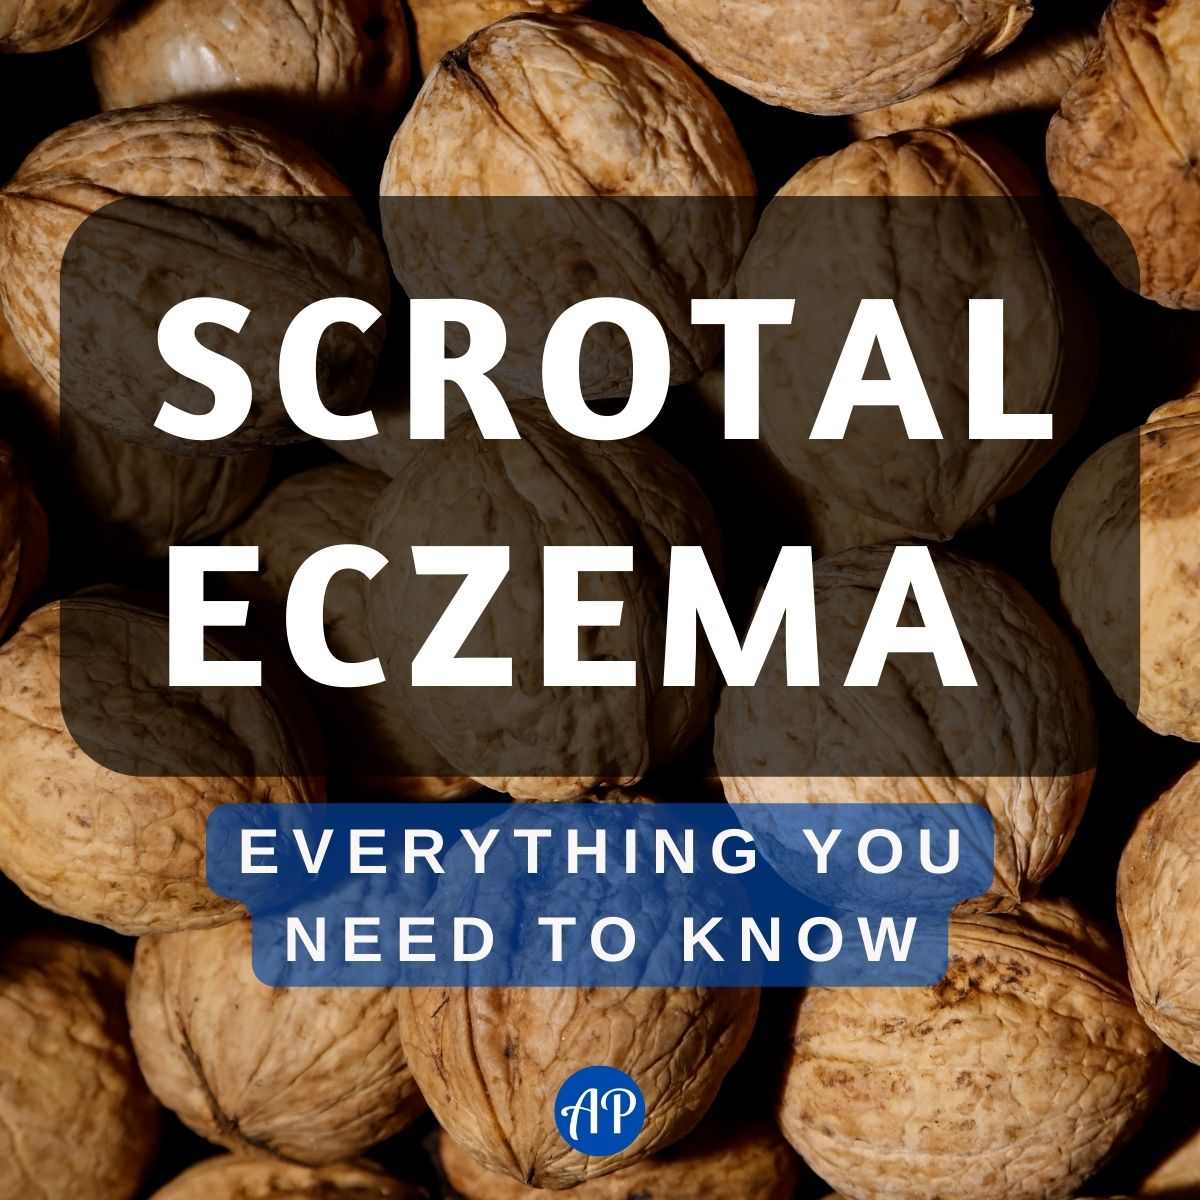 Scrotal Eczema: Everything You Need to Know